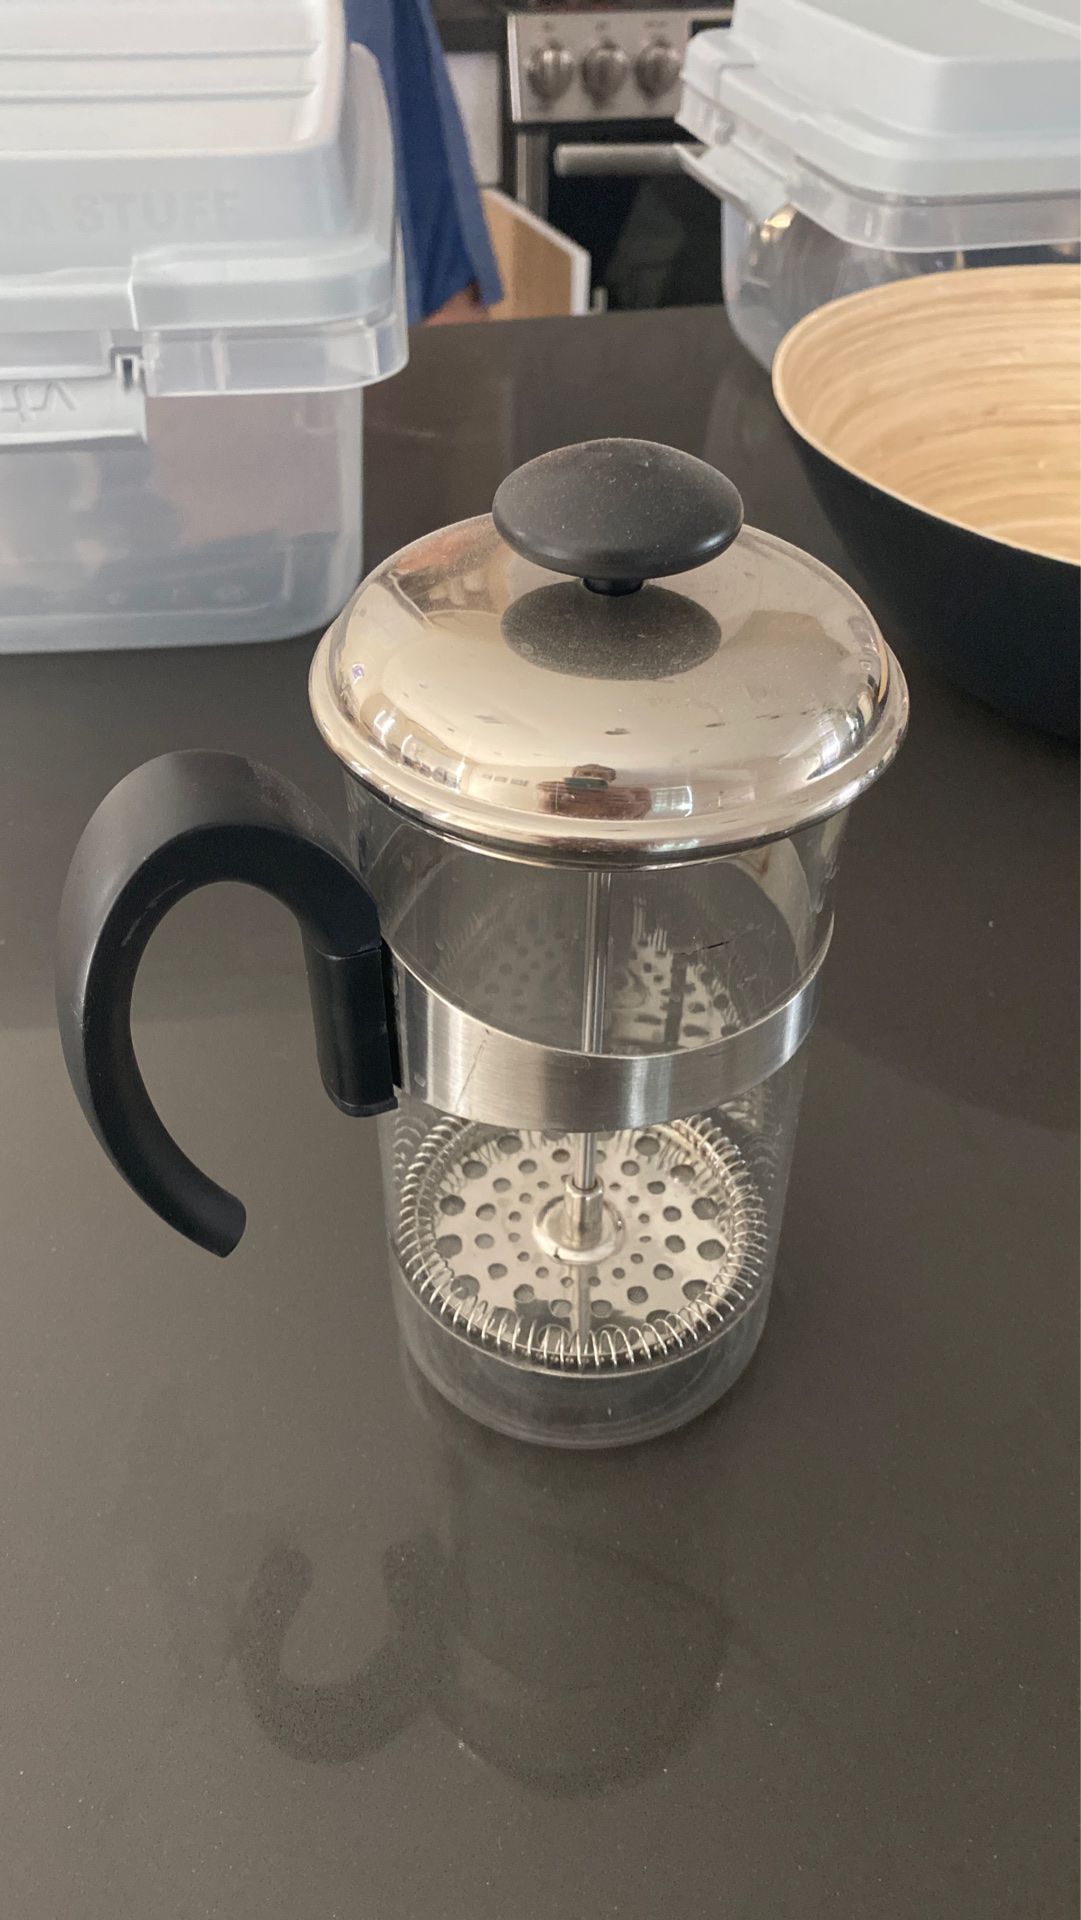 Crate and barrel French press